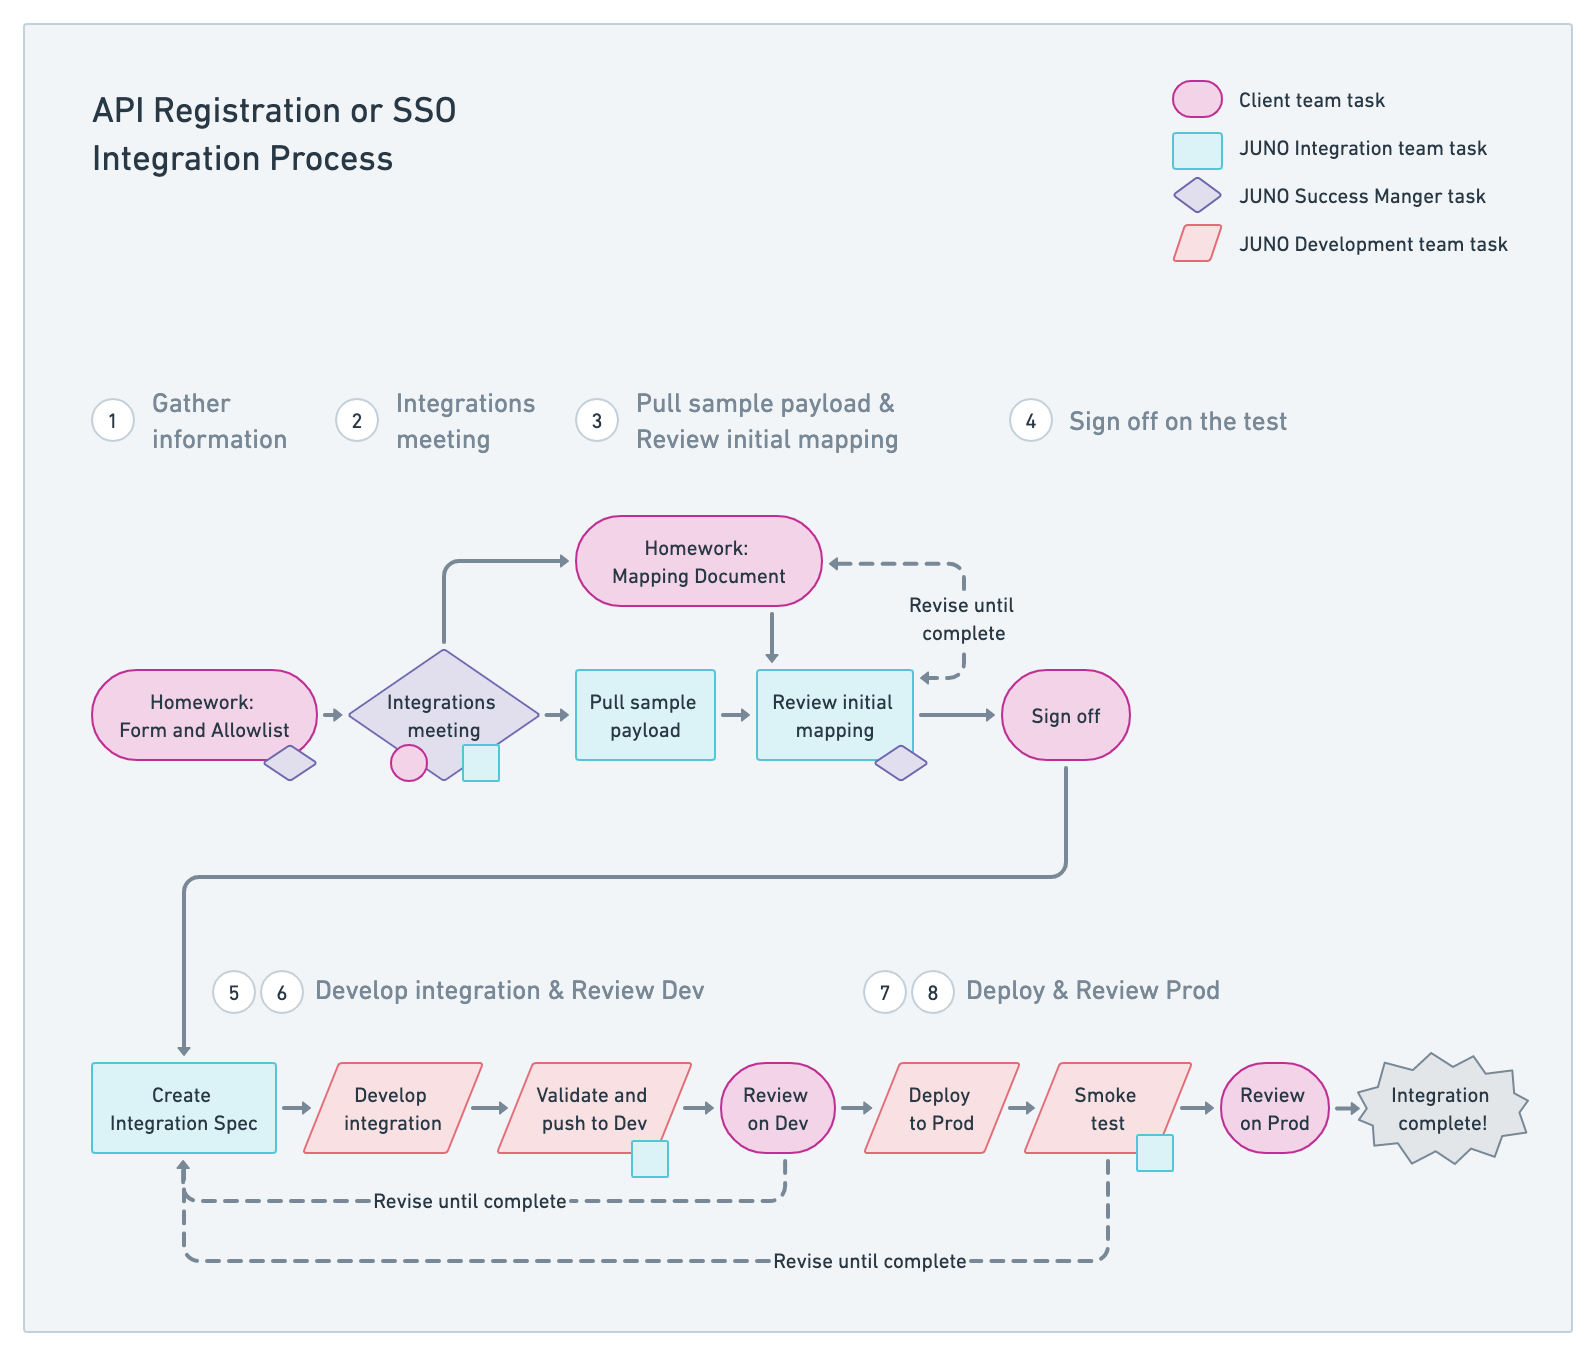 Flowchart summarizing the 'API registration or SSO Integration Process,' which is fully outlined below the image.